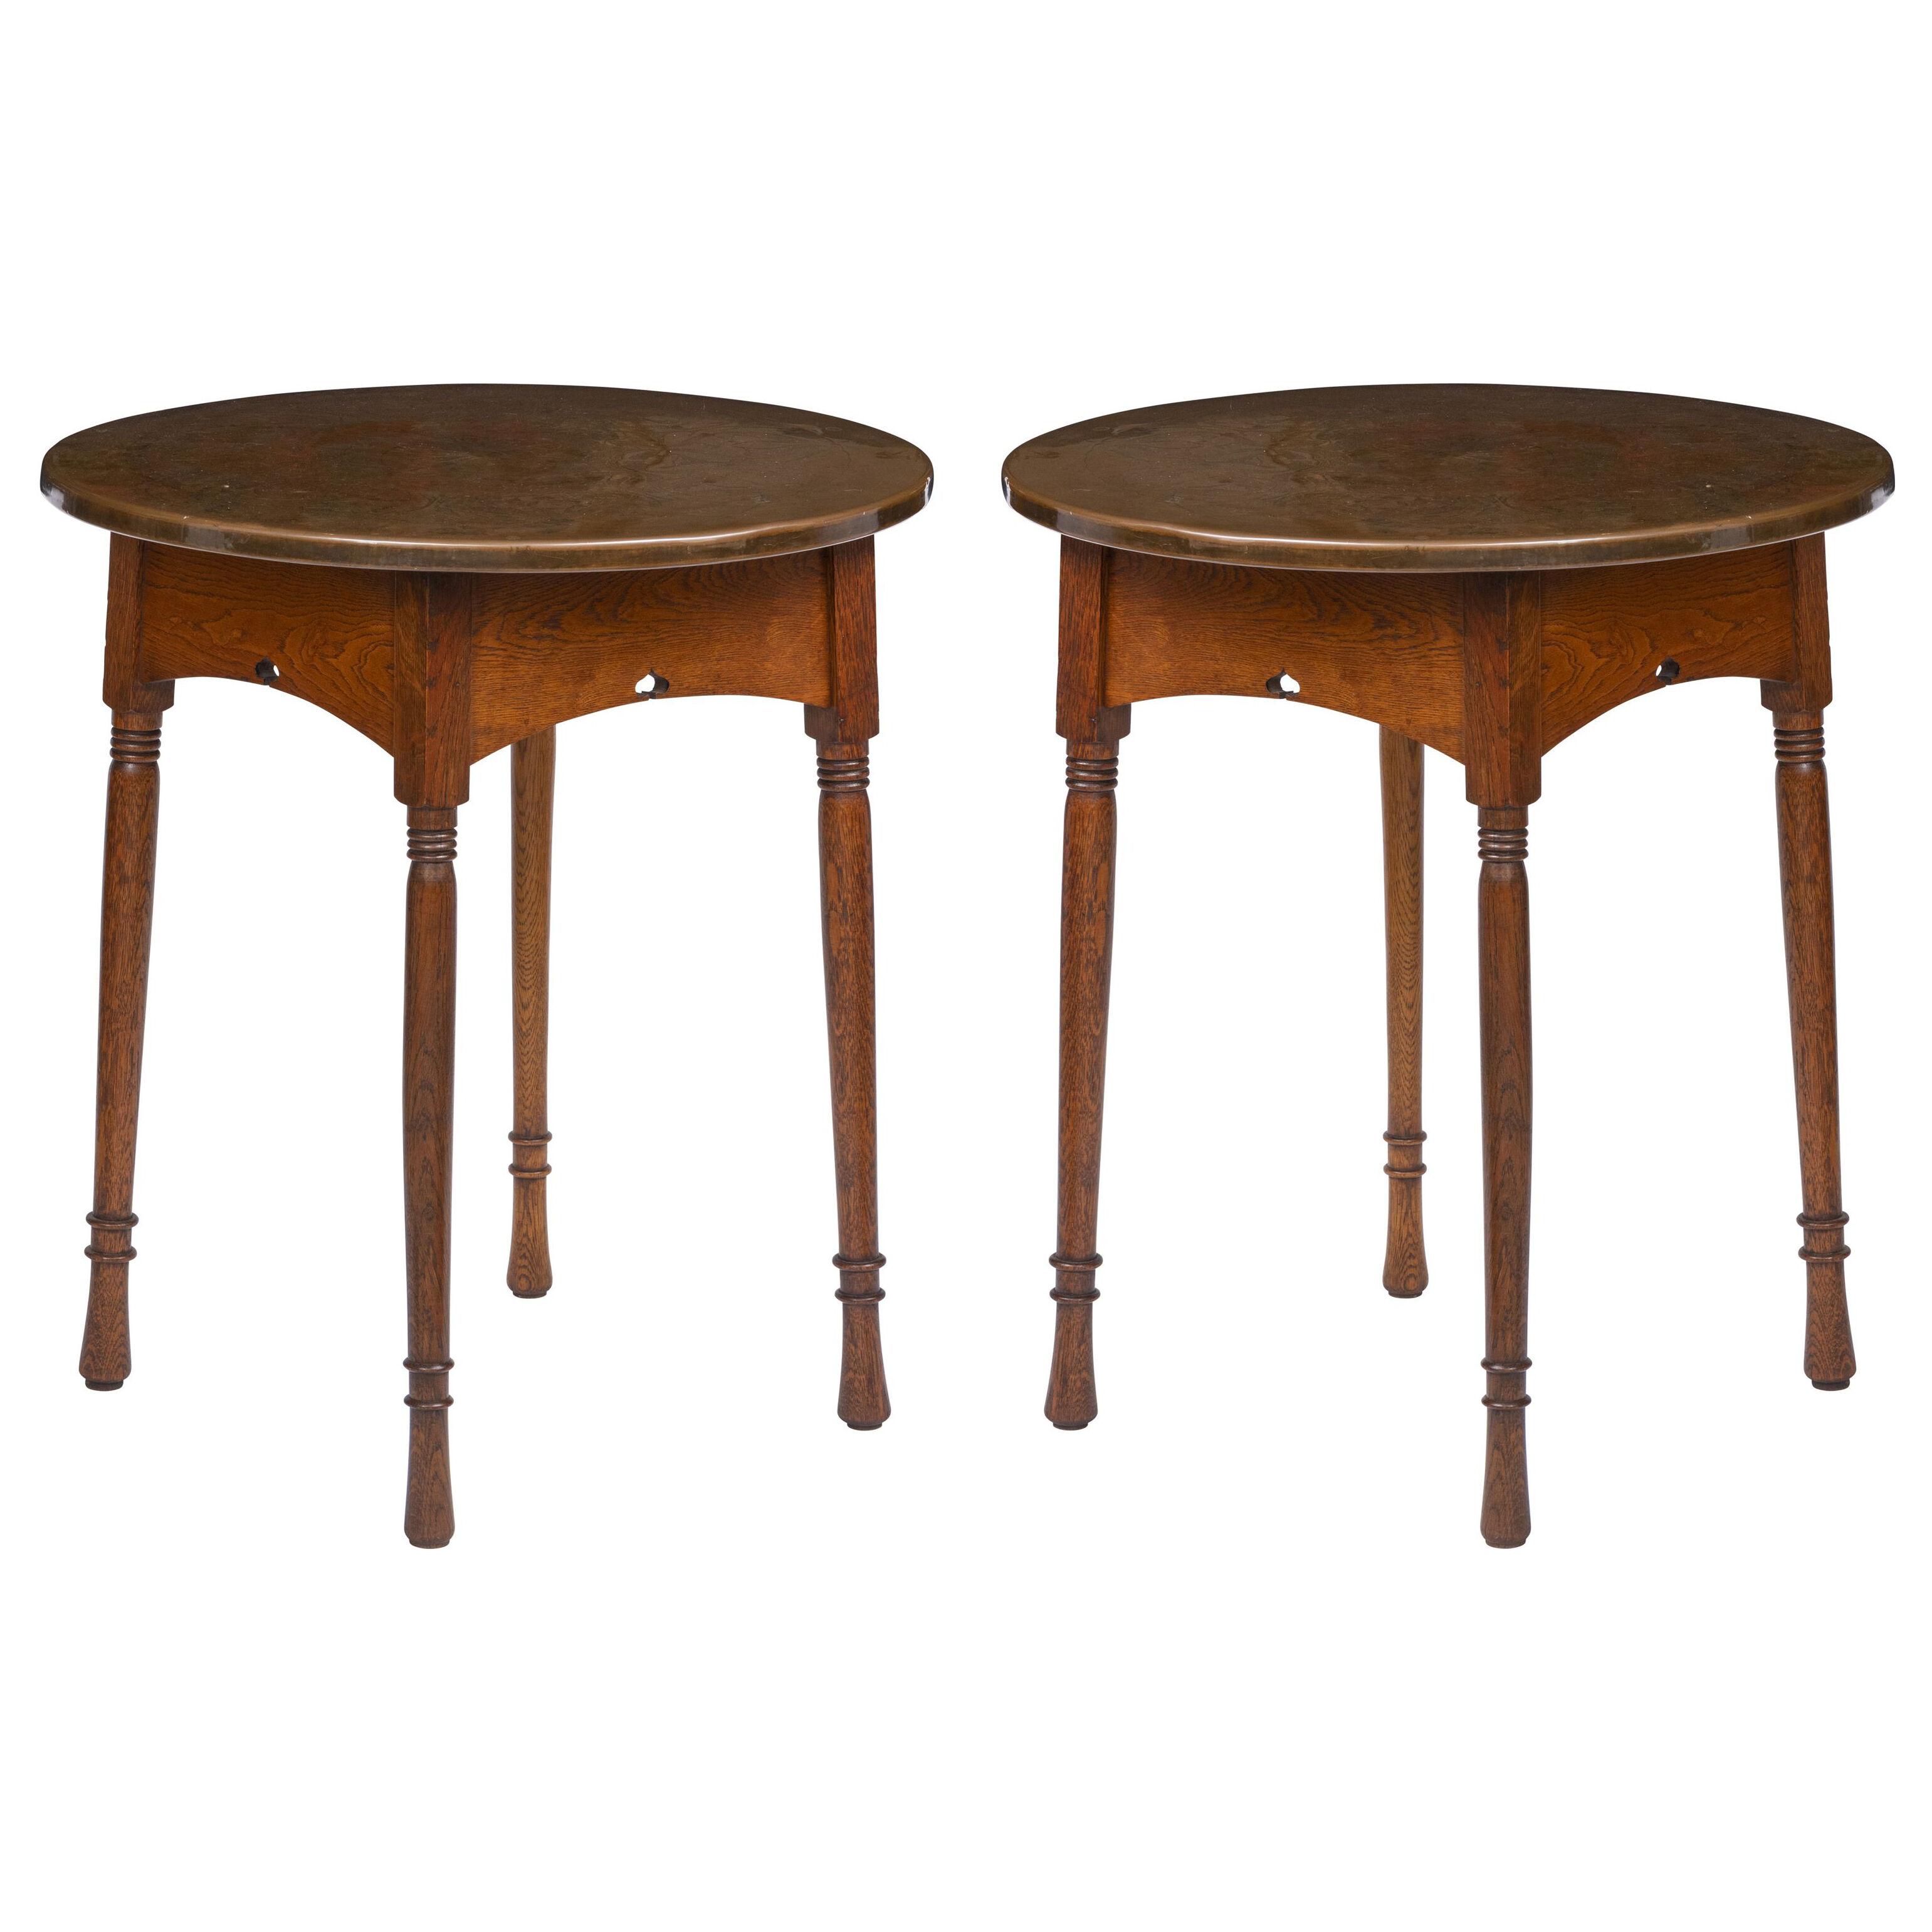 Pair Of Arts And Crafts Side Tables With Copper Tops, England Circa 1900